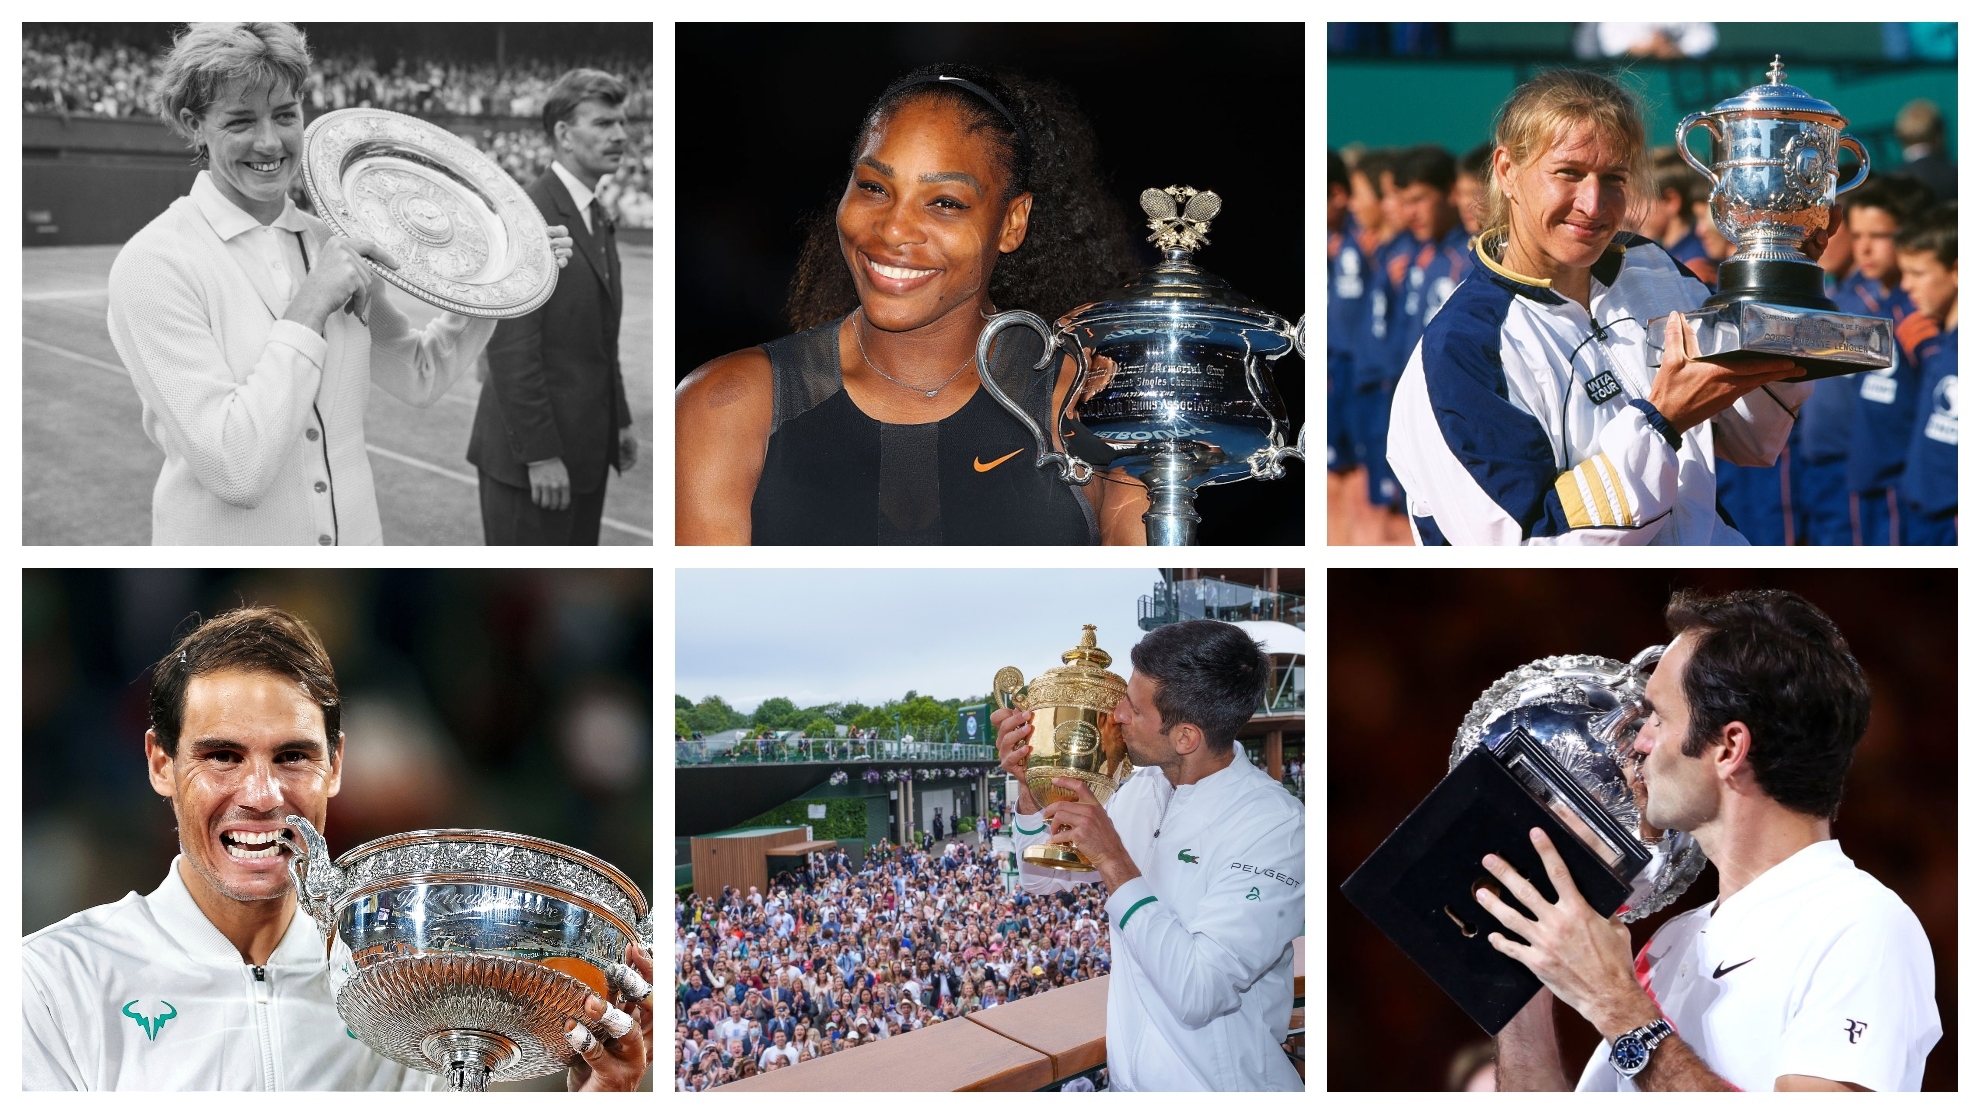 The tennis players with the most Grand Slams